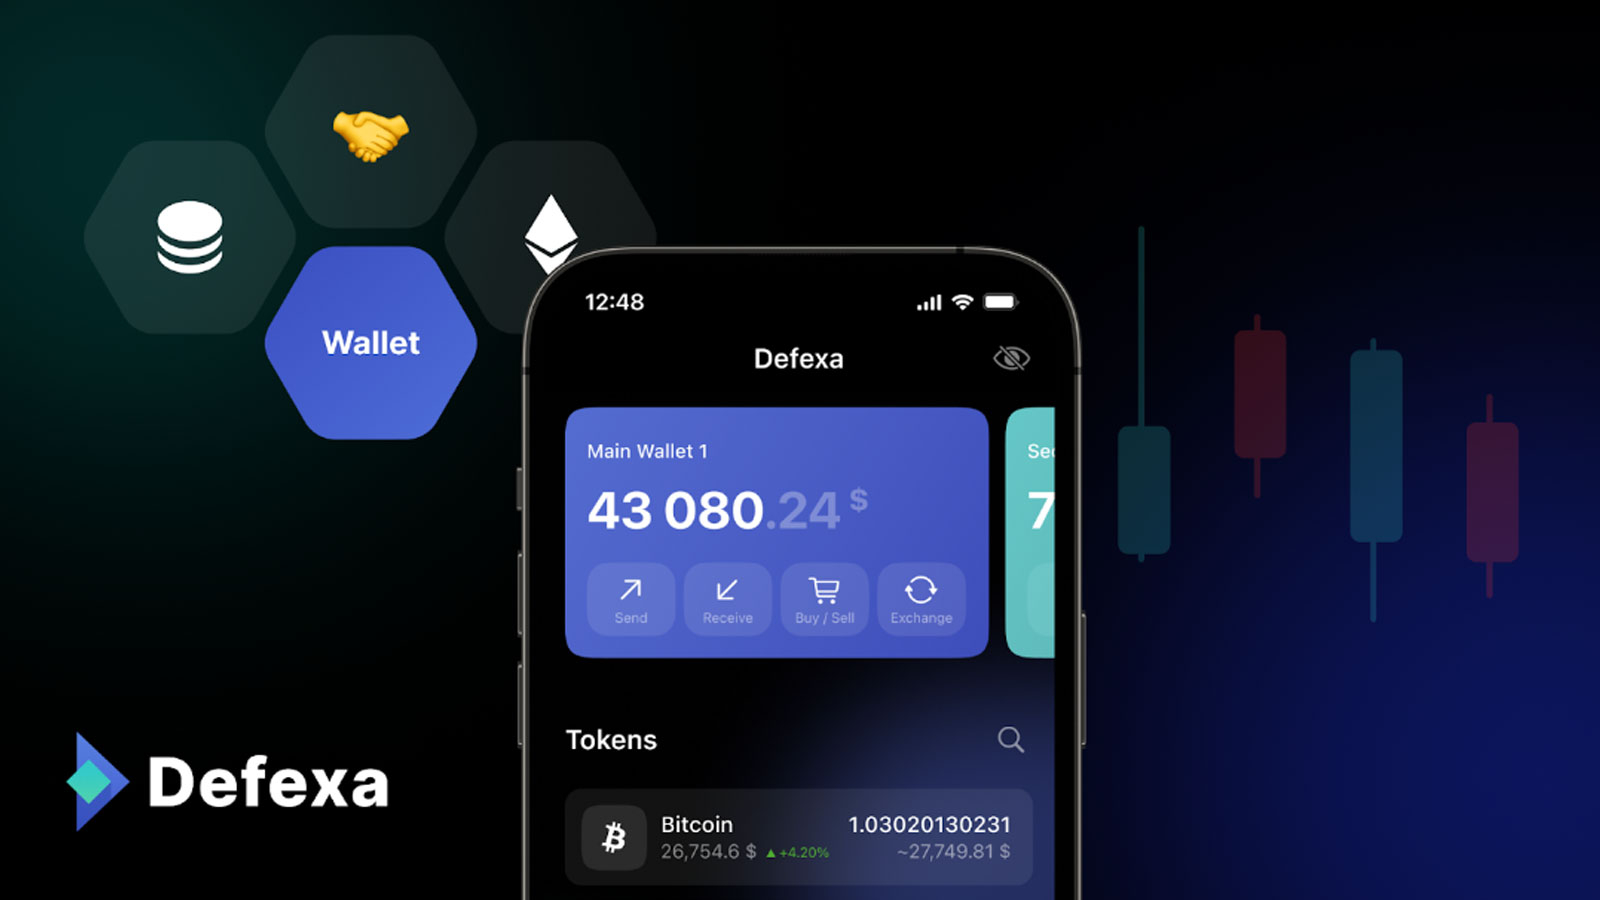 Defexa Wallet: A User-Friendly Mobile Wallet for Cryptocurrencies